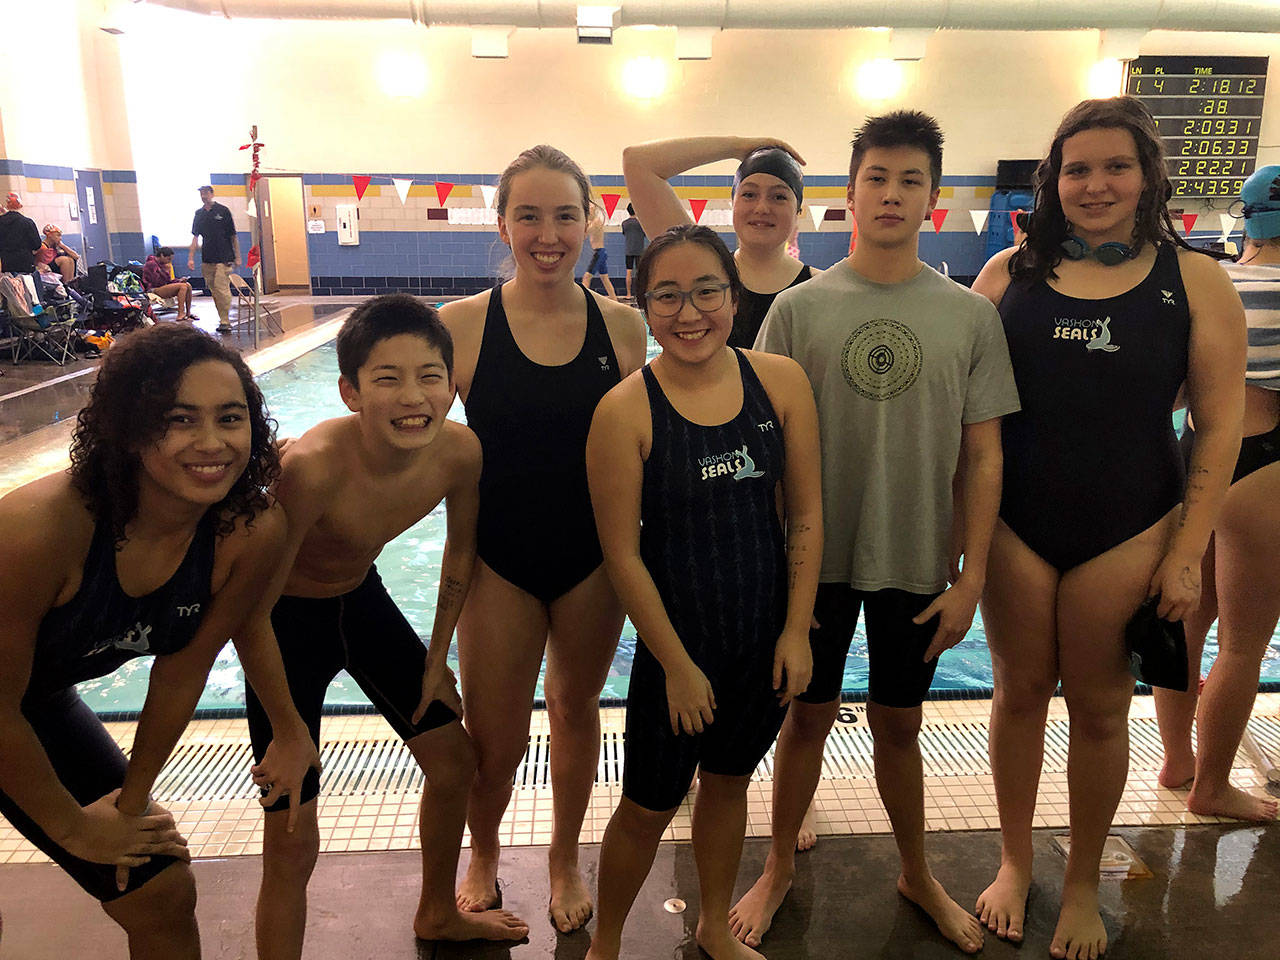 (From left to right) Aliya Ricks, Jamie Choo, Ellie Jackson, Saffron Hinz, Nola Watson, Ethan Choo and Haley Hopper pose for a portrait during the Pacific Northwest Swimming Winter Challenge series at Mount Tahoma High School in Tacoma (Karl Stetson Photo).